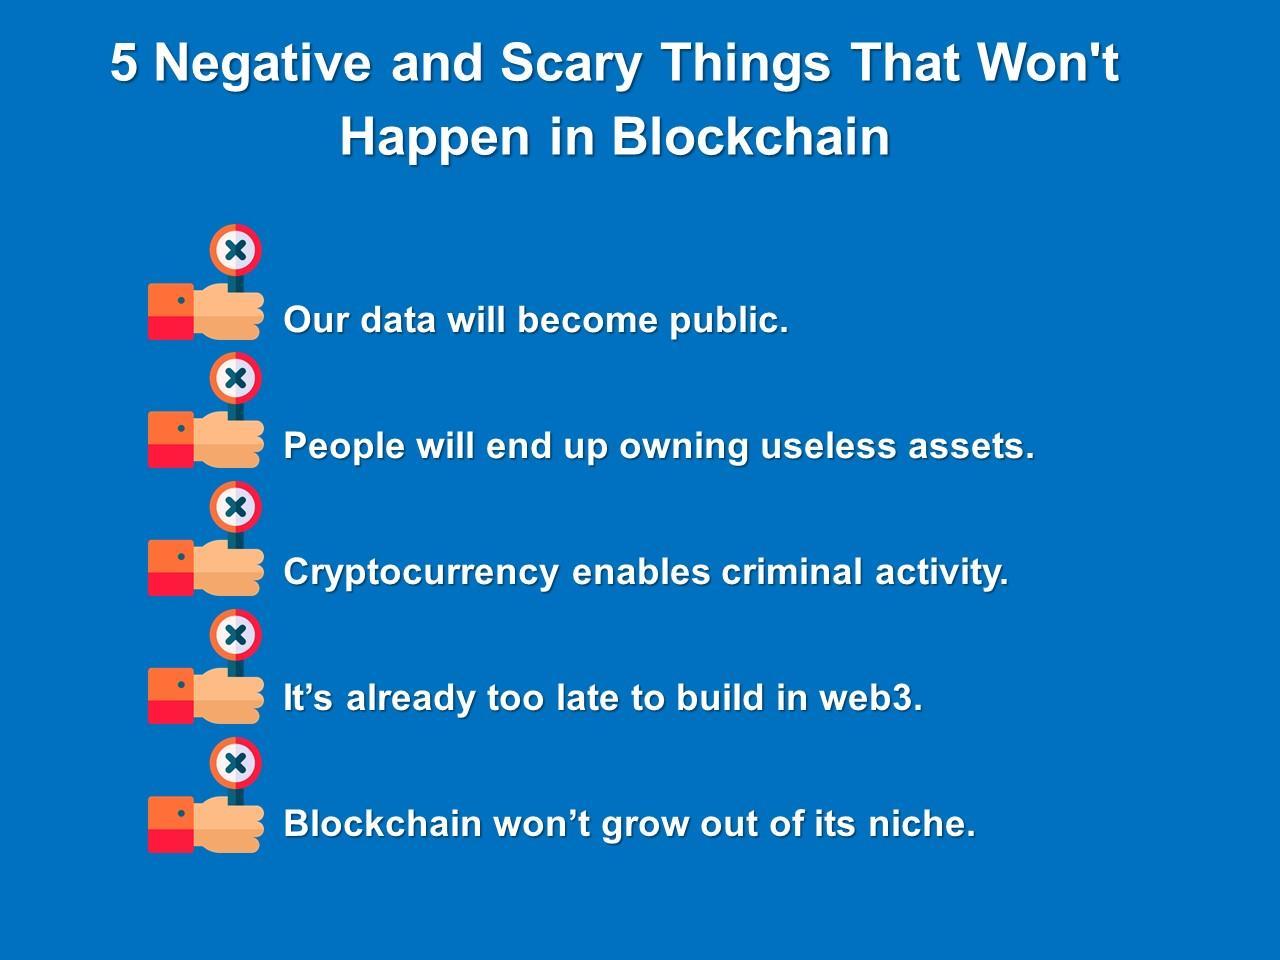 5 Negative and Scary Things That Wont Happen in Blockchain